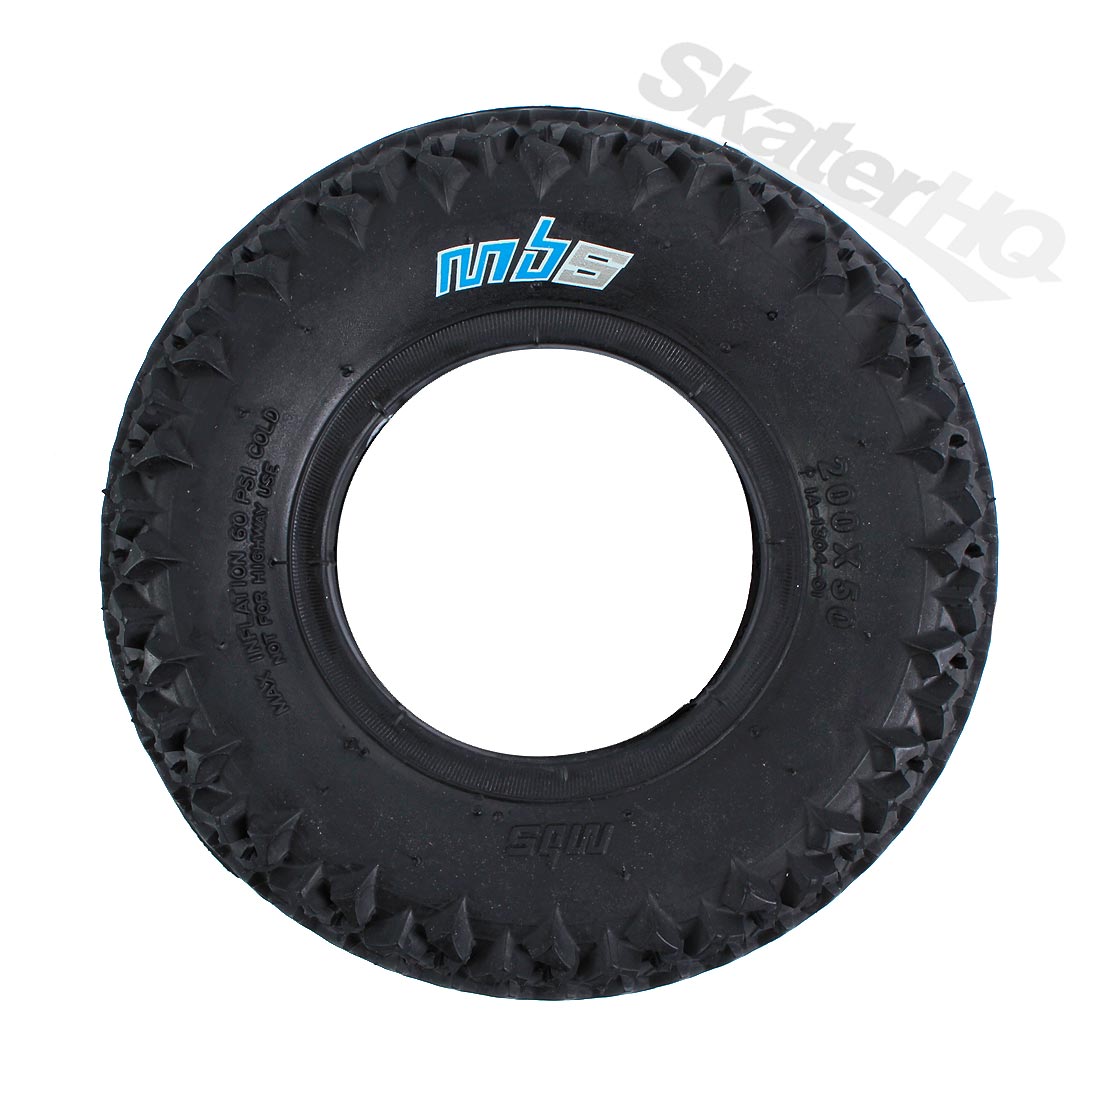 MBS - Royal T3 Tire Black- Single 200 x 50mm Skateboard Hardware and Parts